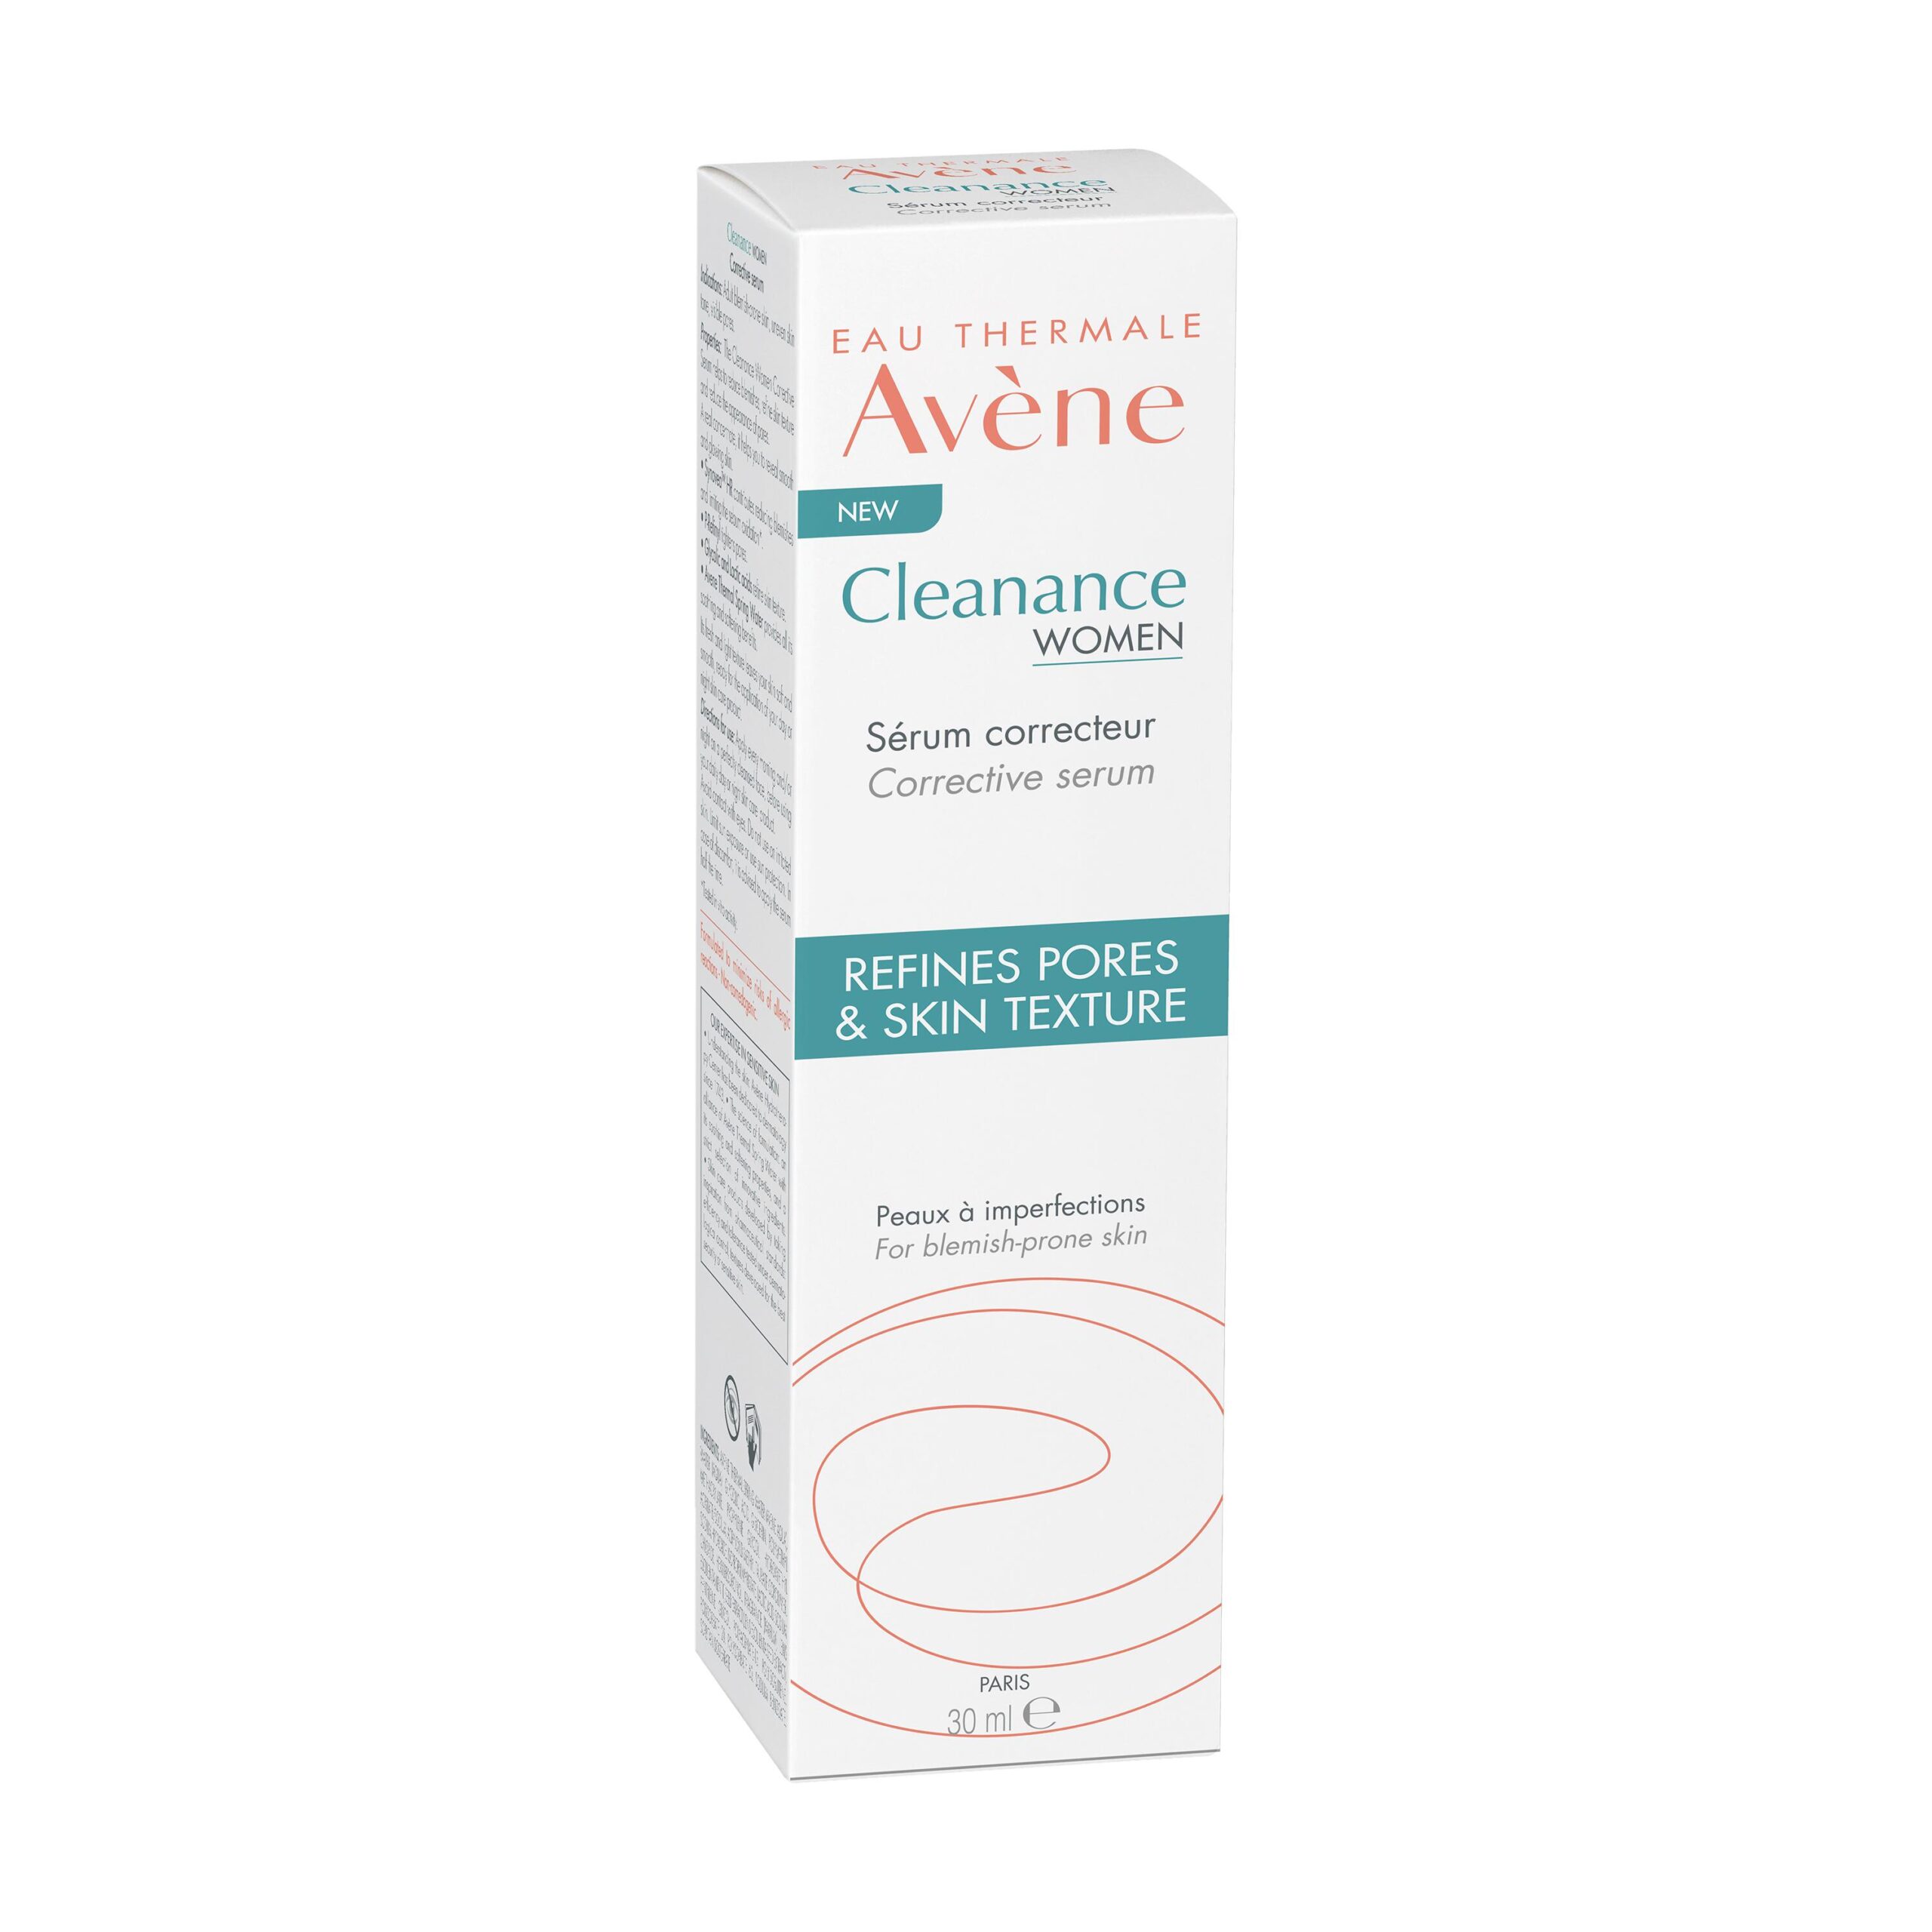 Eau Thermale Avène Cleanance Women Corrective Serum and Smoothing Night  Cream Reviews